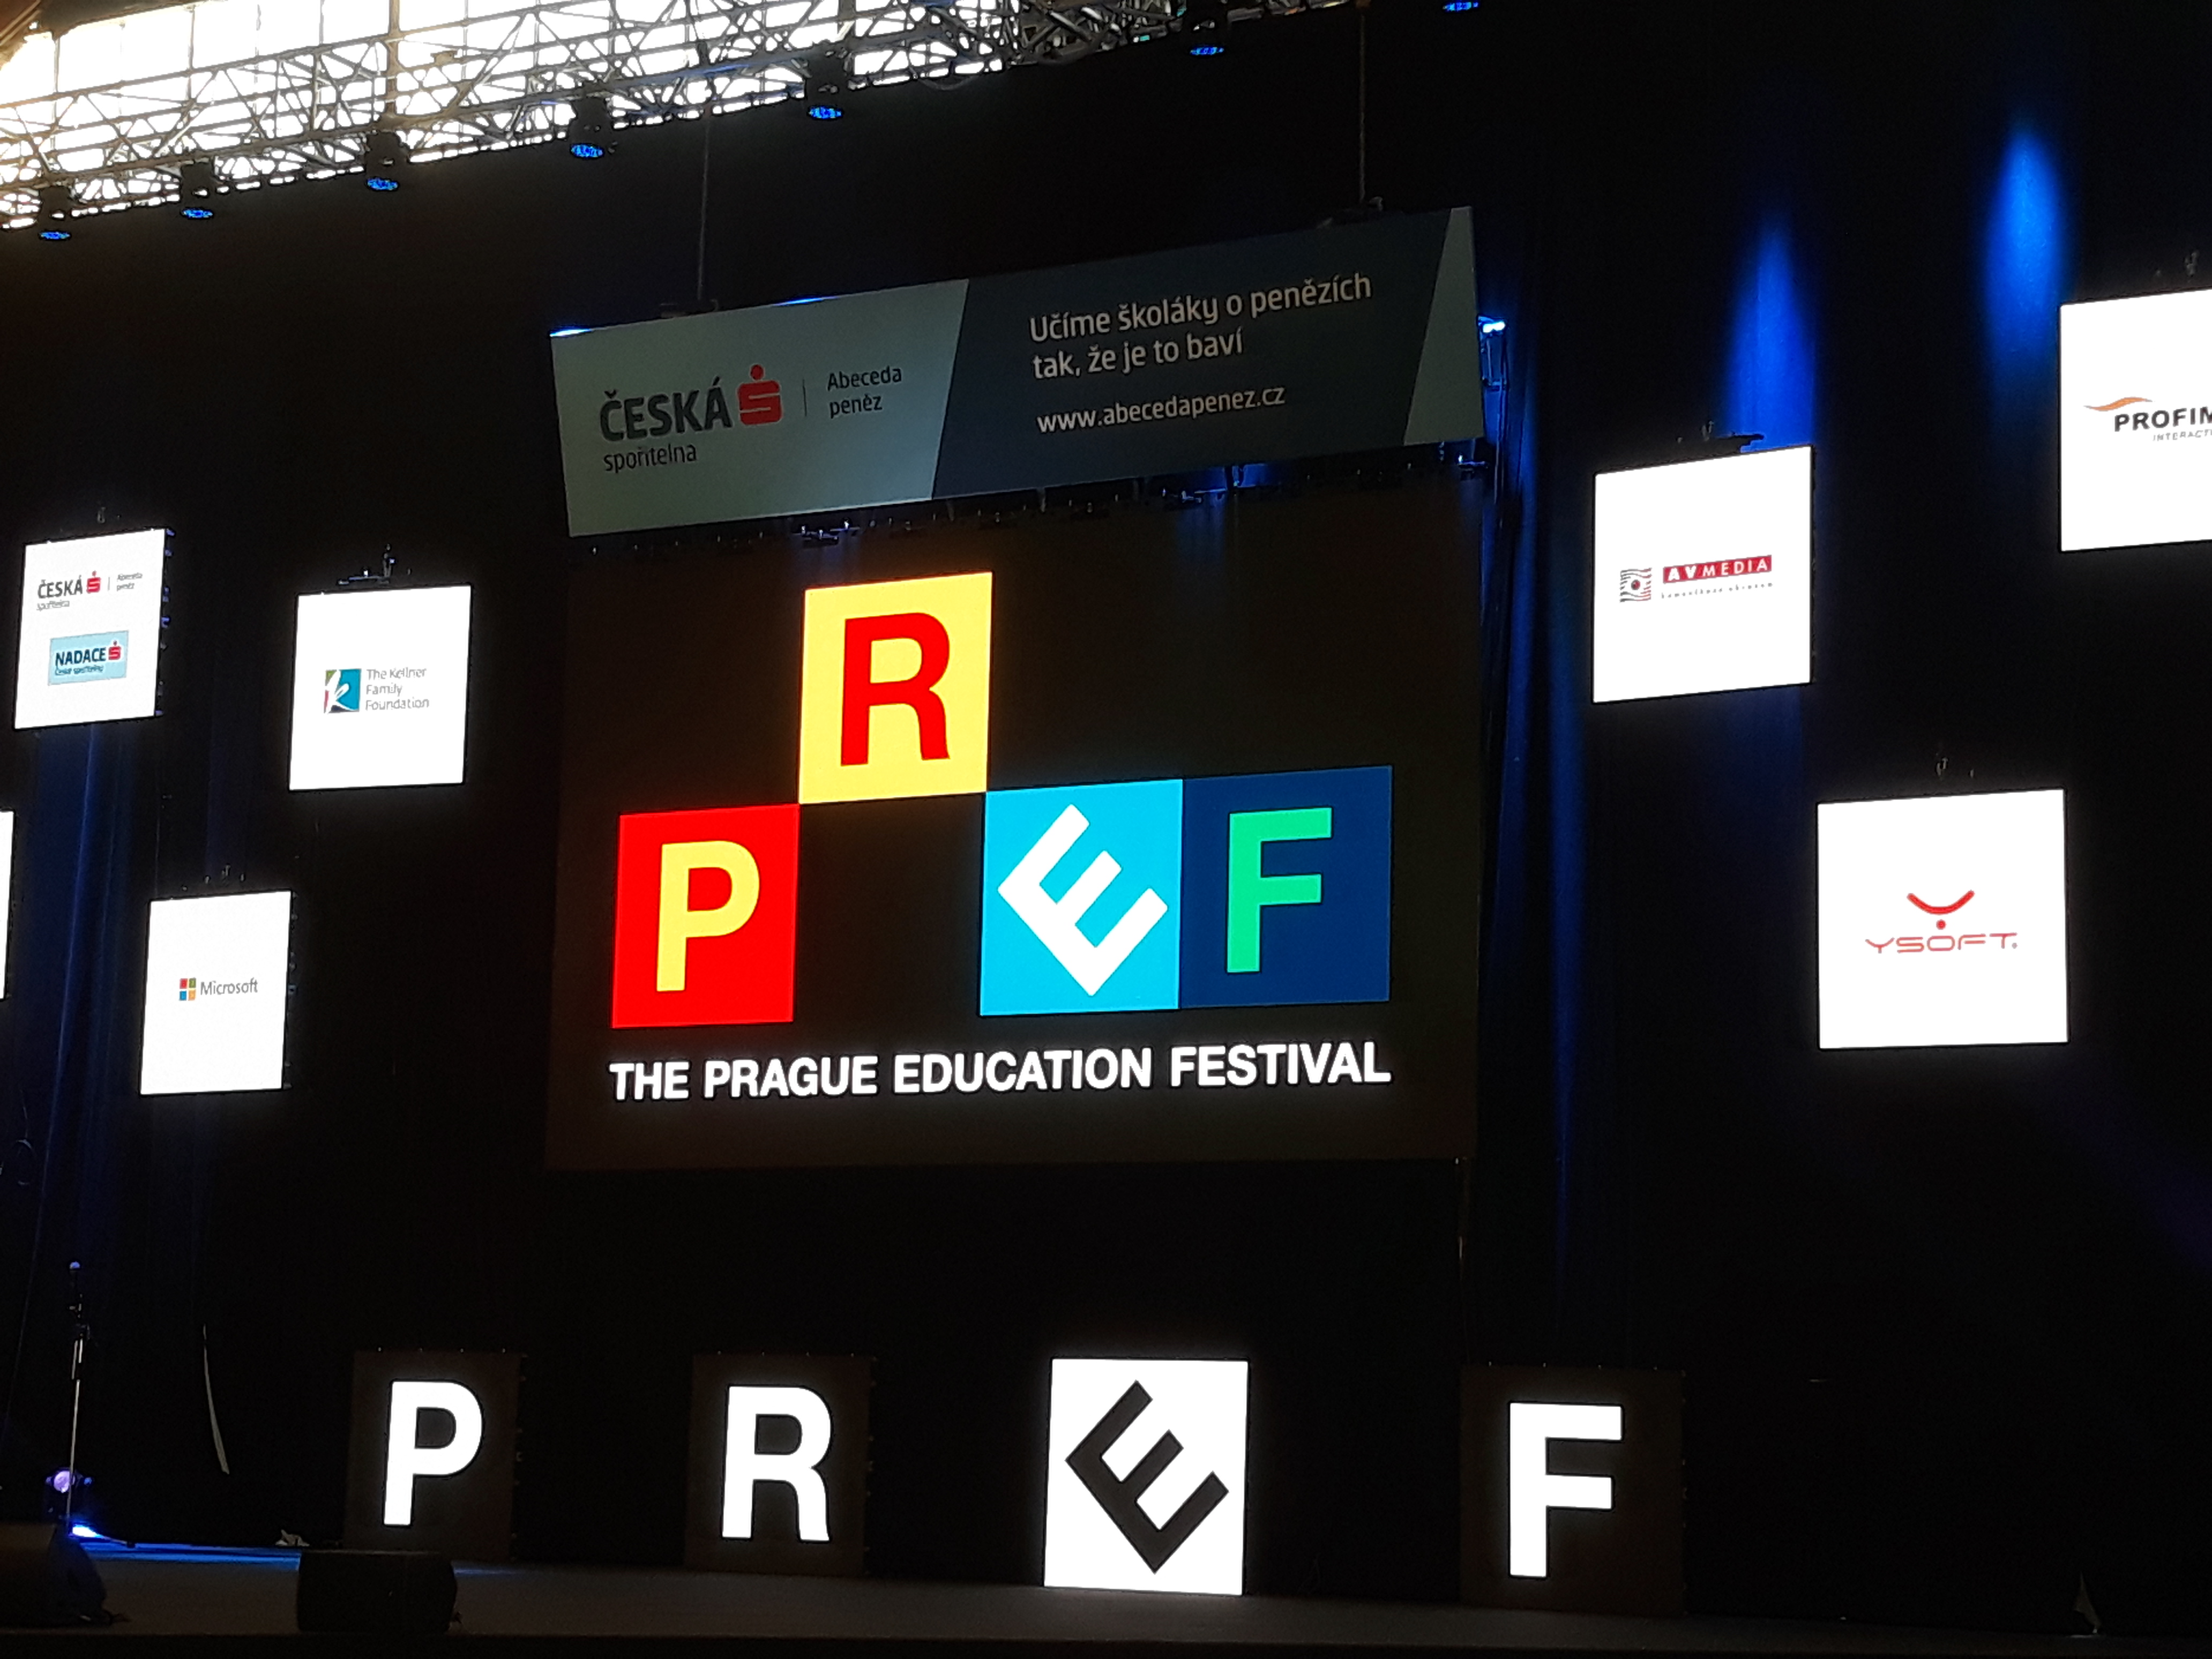 First year of the biggest education festival in the Czech Republic - Prague Education Festival